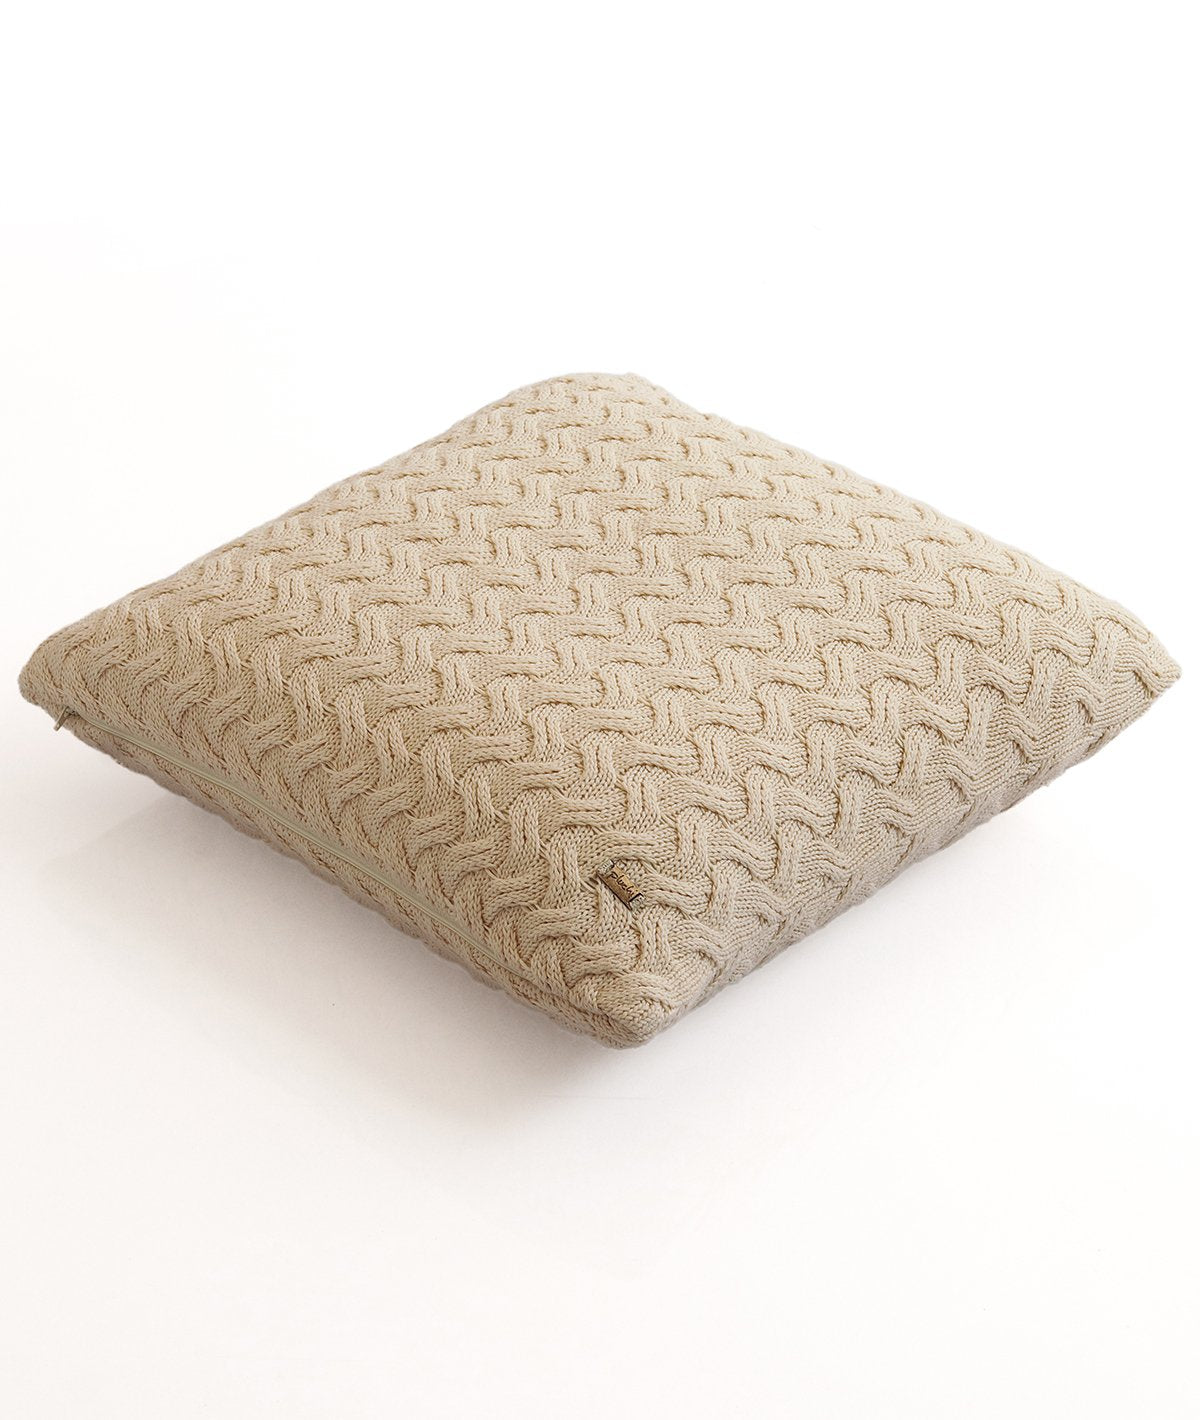 Criss Cross Cotton Knitted Decorative Natural Color 18 x 18 Inches Cushion Cover